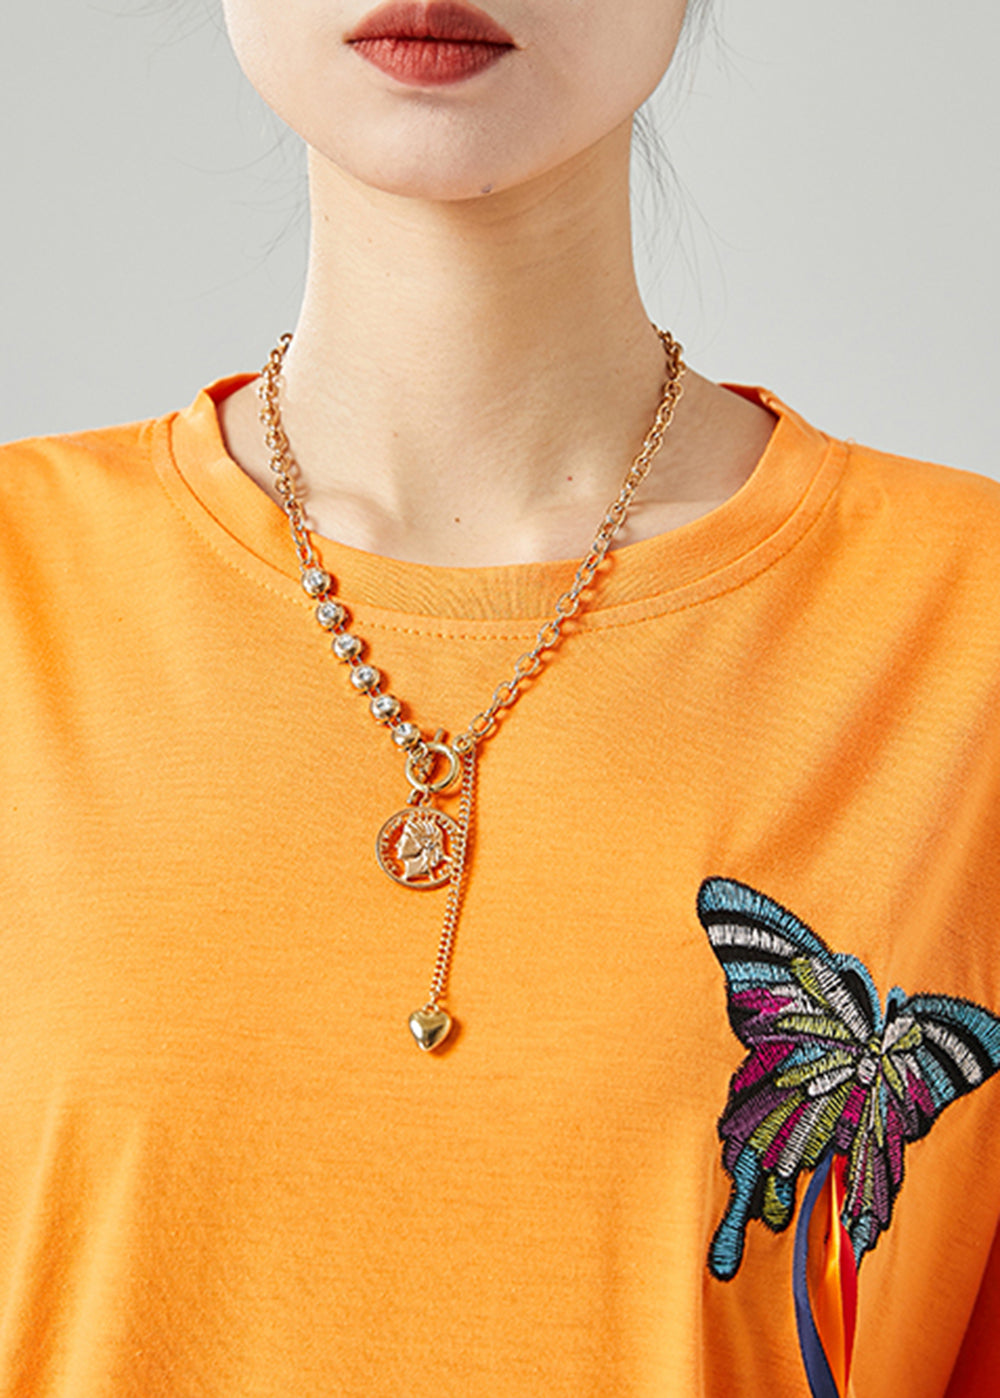 Simple Orange Embroideried Butterfly Tassel Cotton Tank Summer LY6701 - fabuloryshop